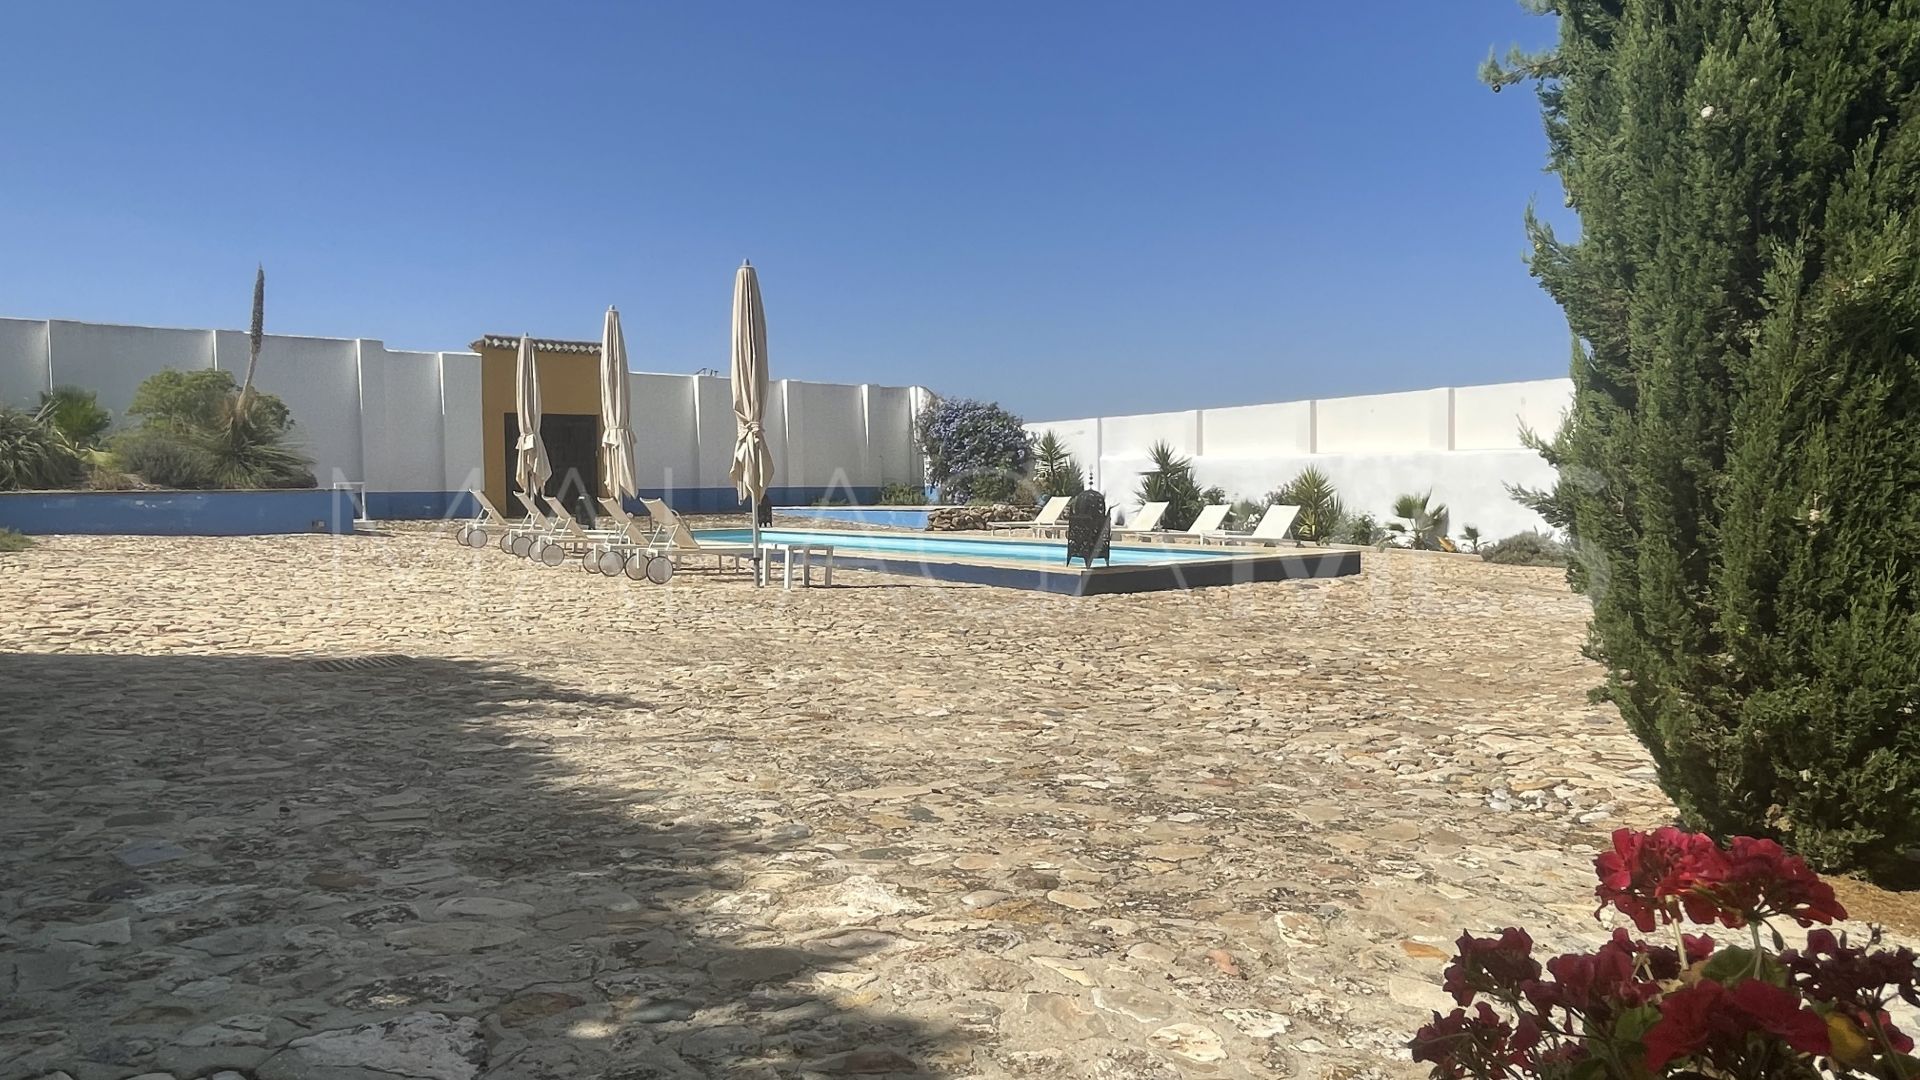 Cortijo with 8 bedrooms for sale in Antequera